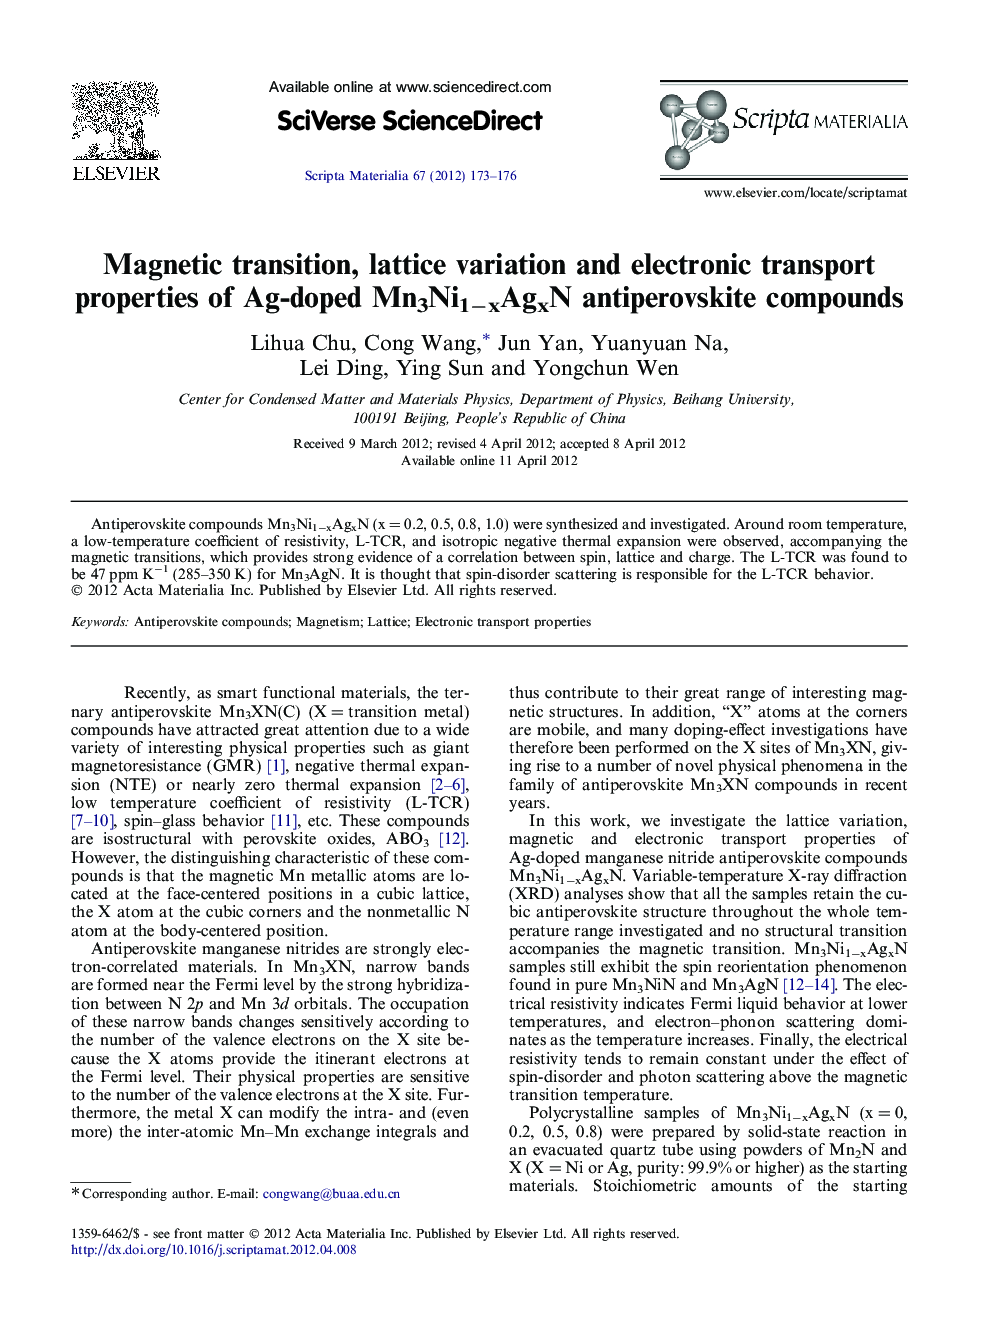 Magnetic transition, lattice variation and electronic transport properties of Ag-doped Mn3Ni1−xAgxN antiperovskite compounds